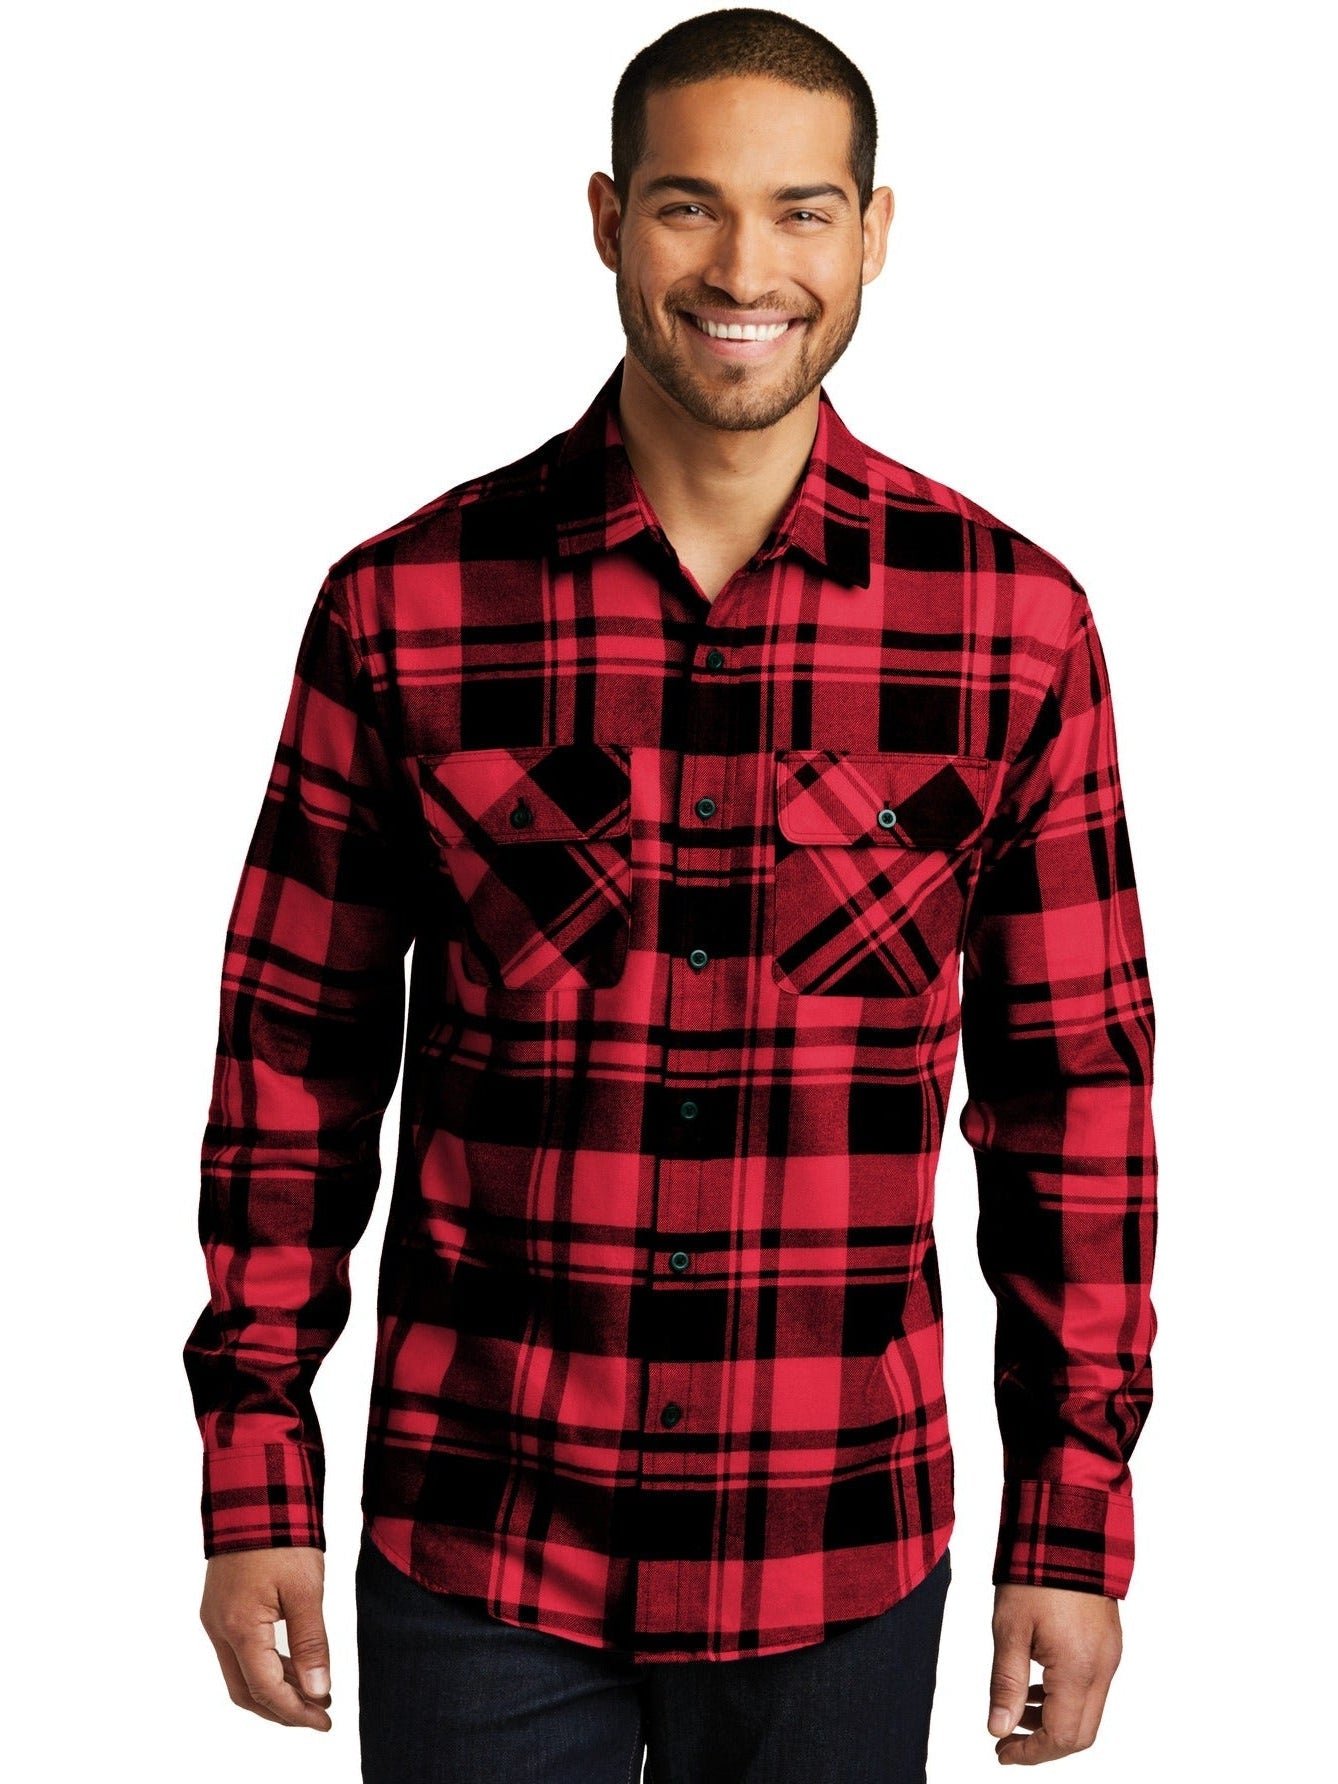 handicappet celle Lejlighedsvis Port Authority Flannel Shirt with Embroidery | W668 | Thread Logic